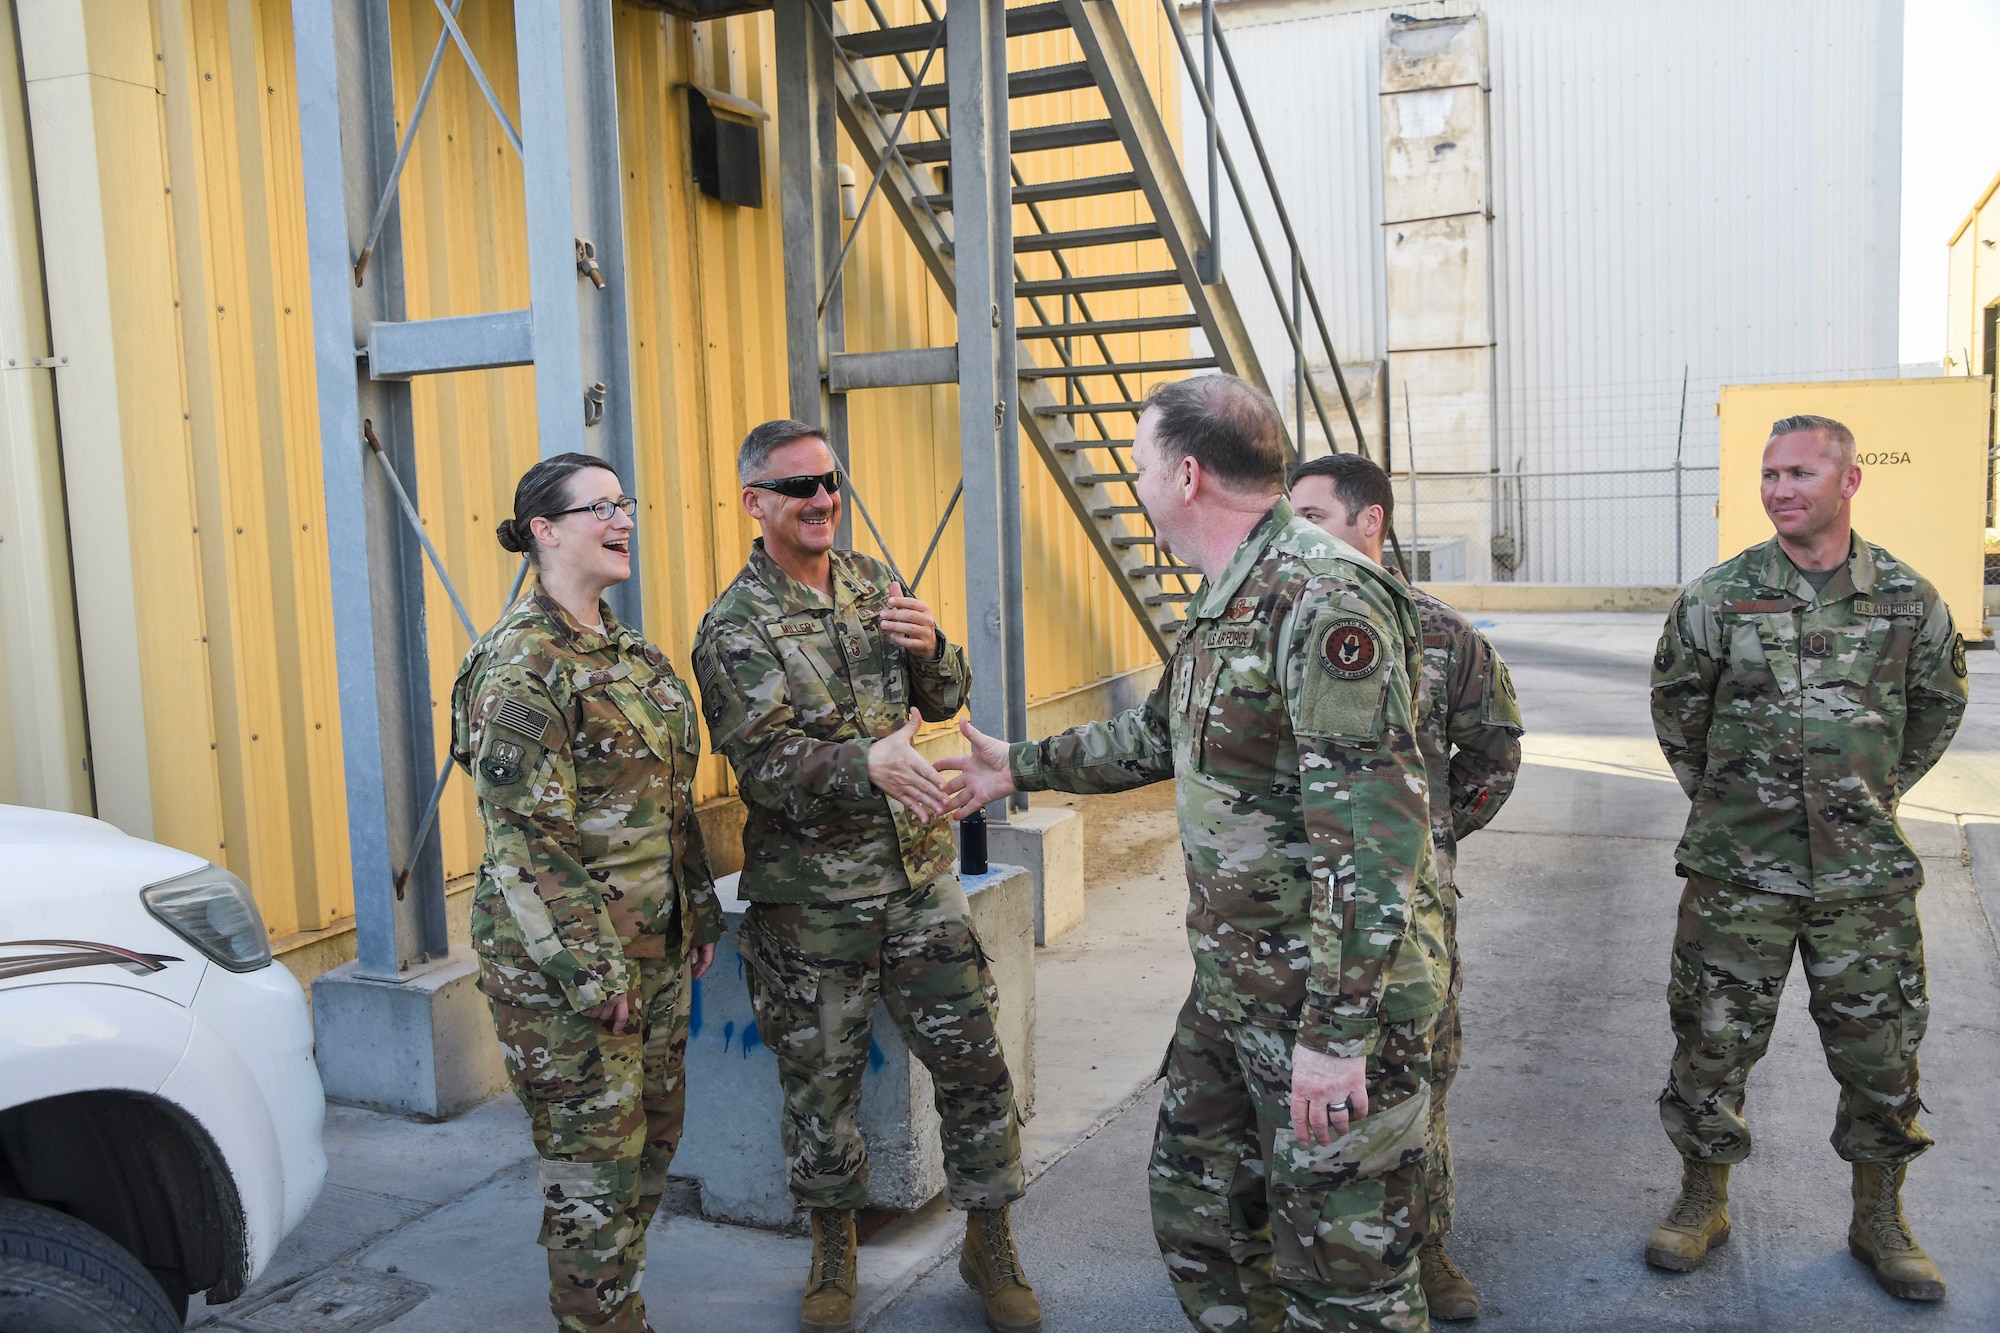 U.S. Air Force Lt. Gen. Richard Scobee, commander of Air Force Reserve Command, greets members of the 380th Expeditionary Operations Group during his visit to Al Dhafra Air Base, United Arab Emirates, Feb. 13, 2019.